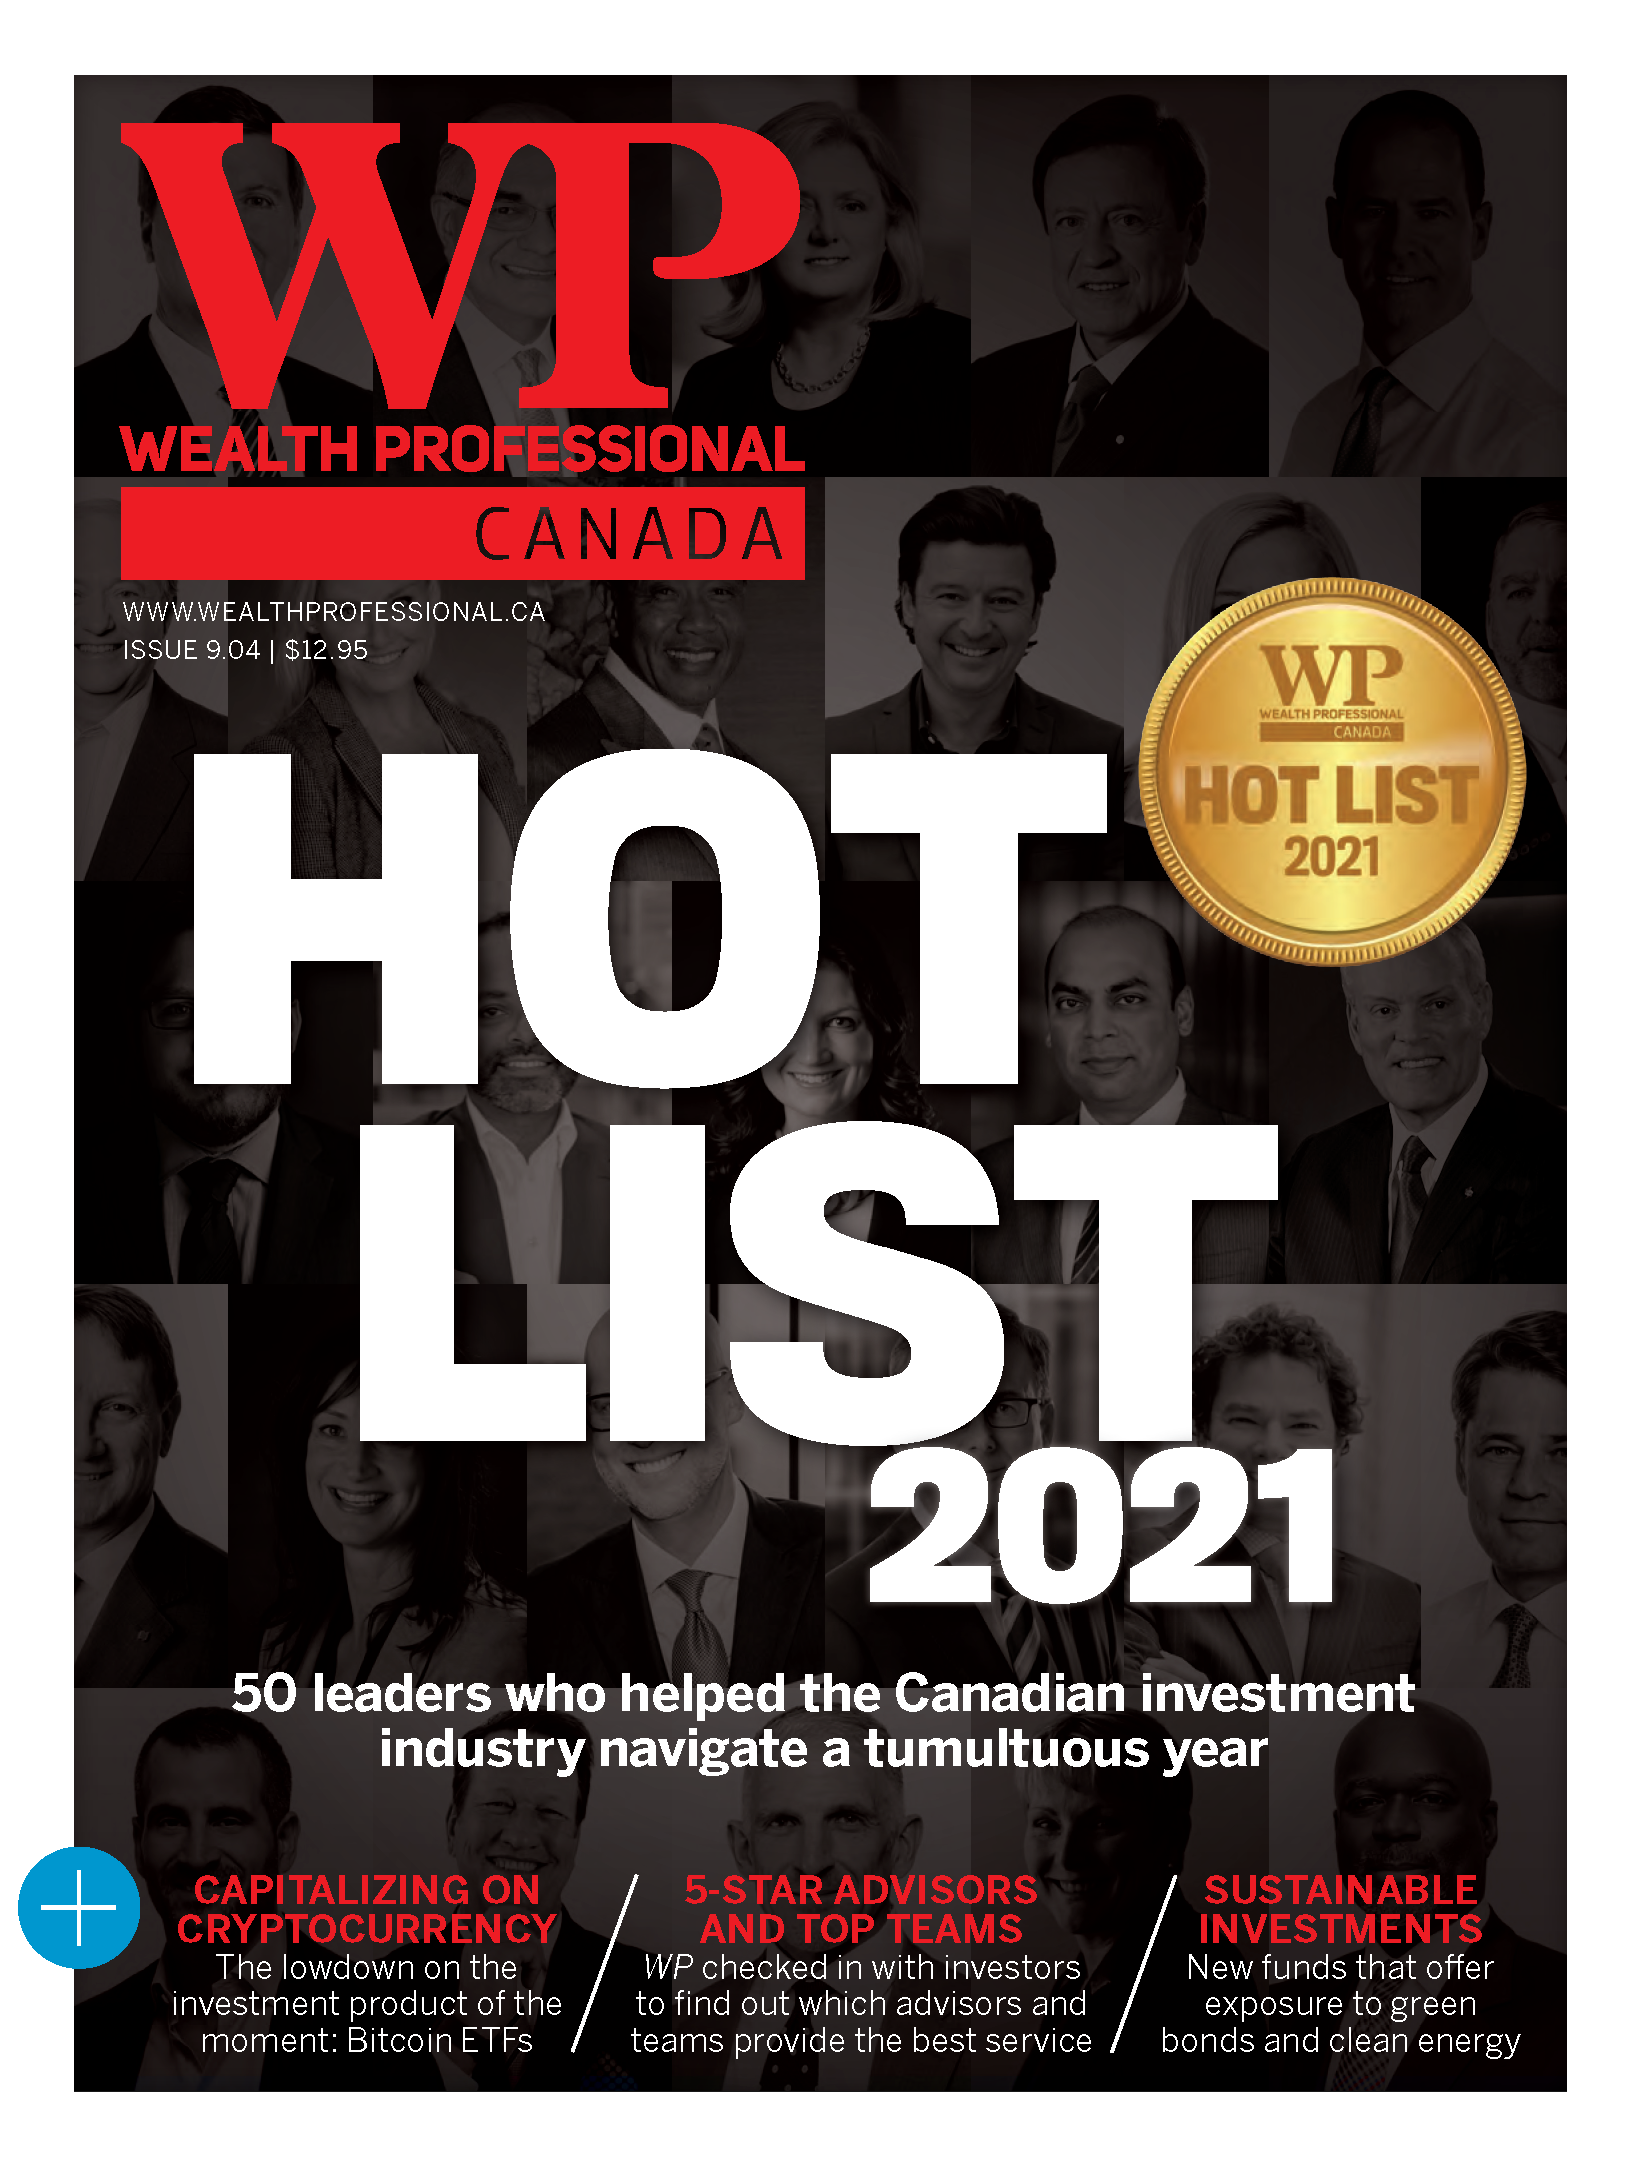 Wealth Professional Canada Hot List 2021. 50 Leaders who helped the Canadian investment industry navigate a tumultuous year.